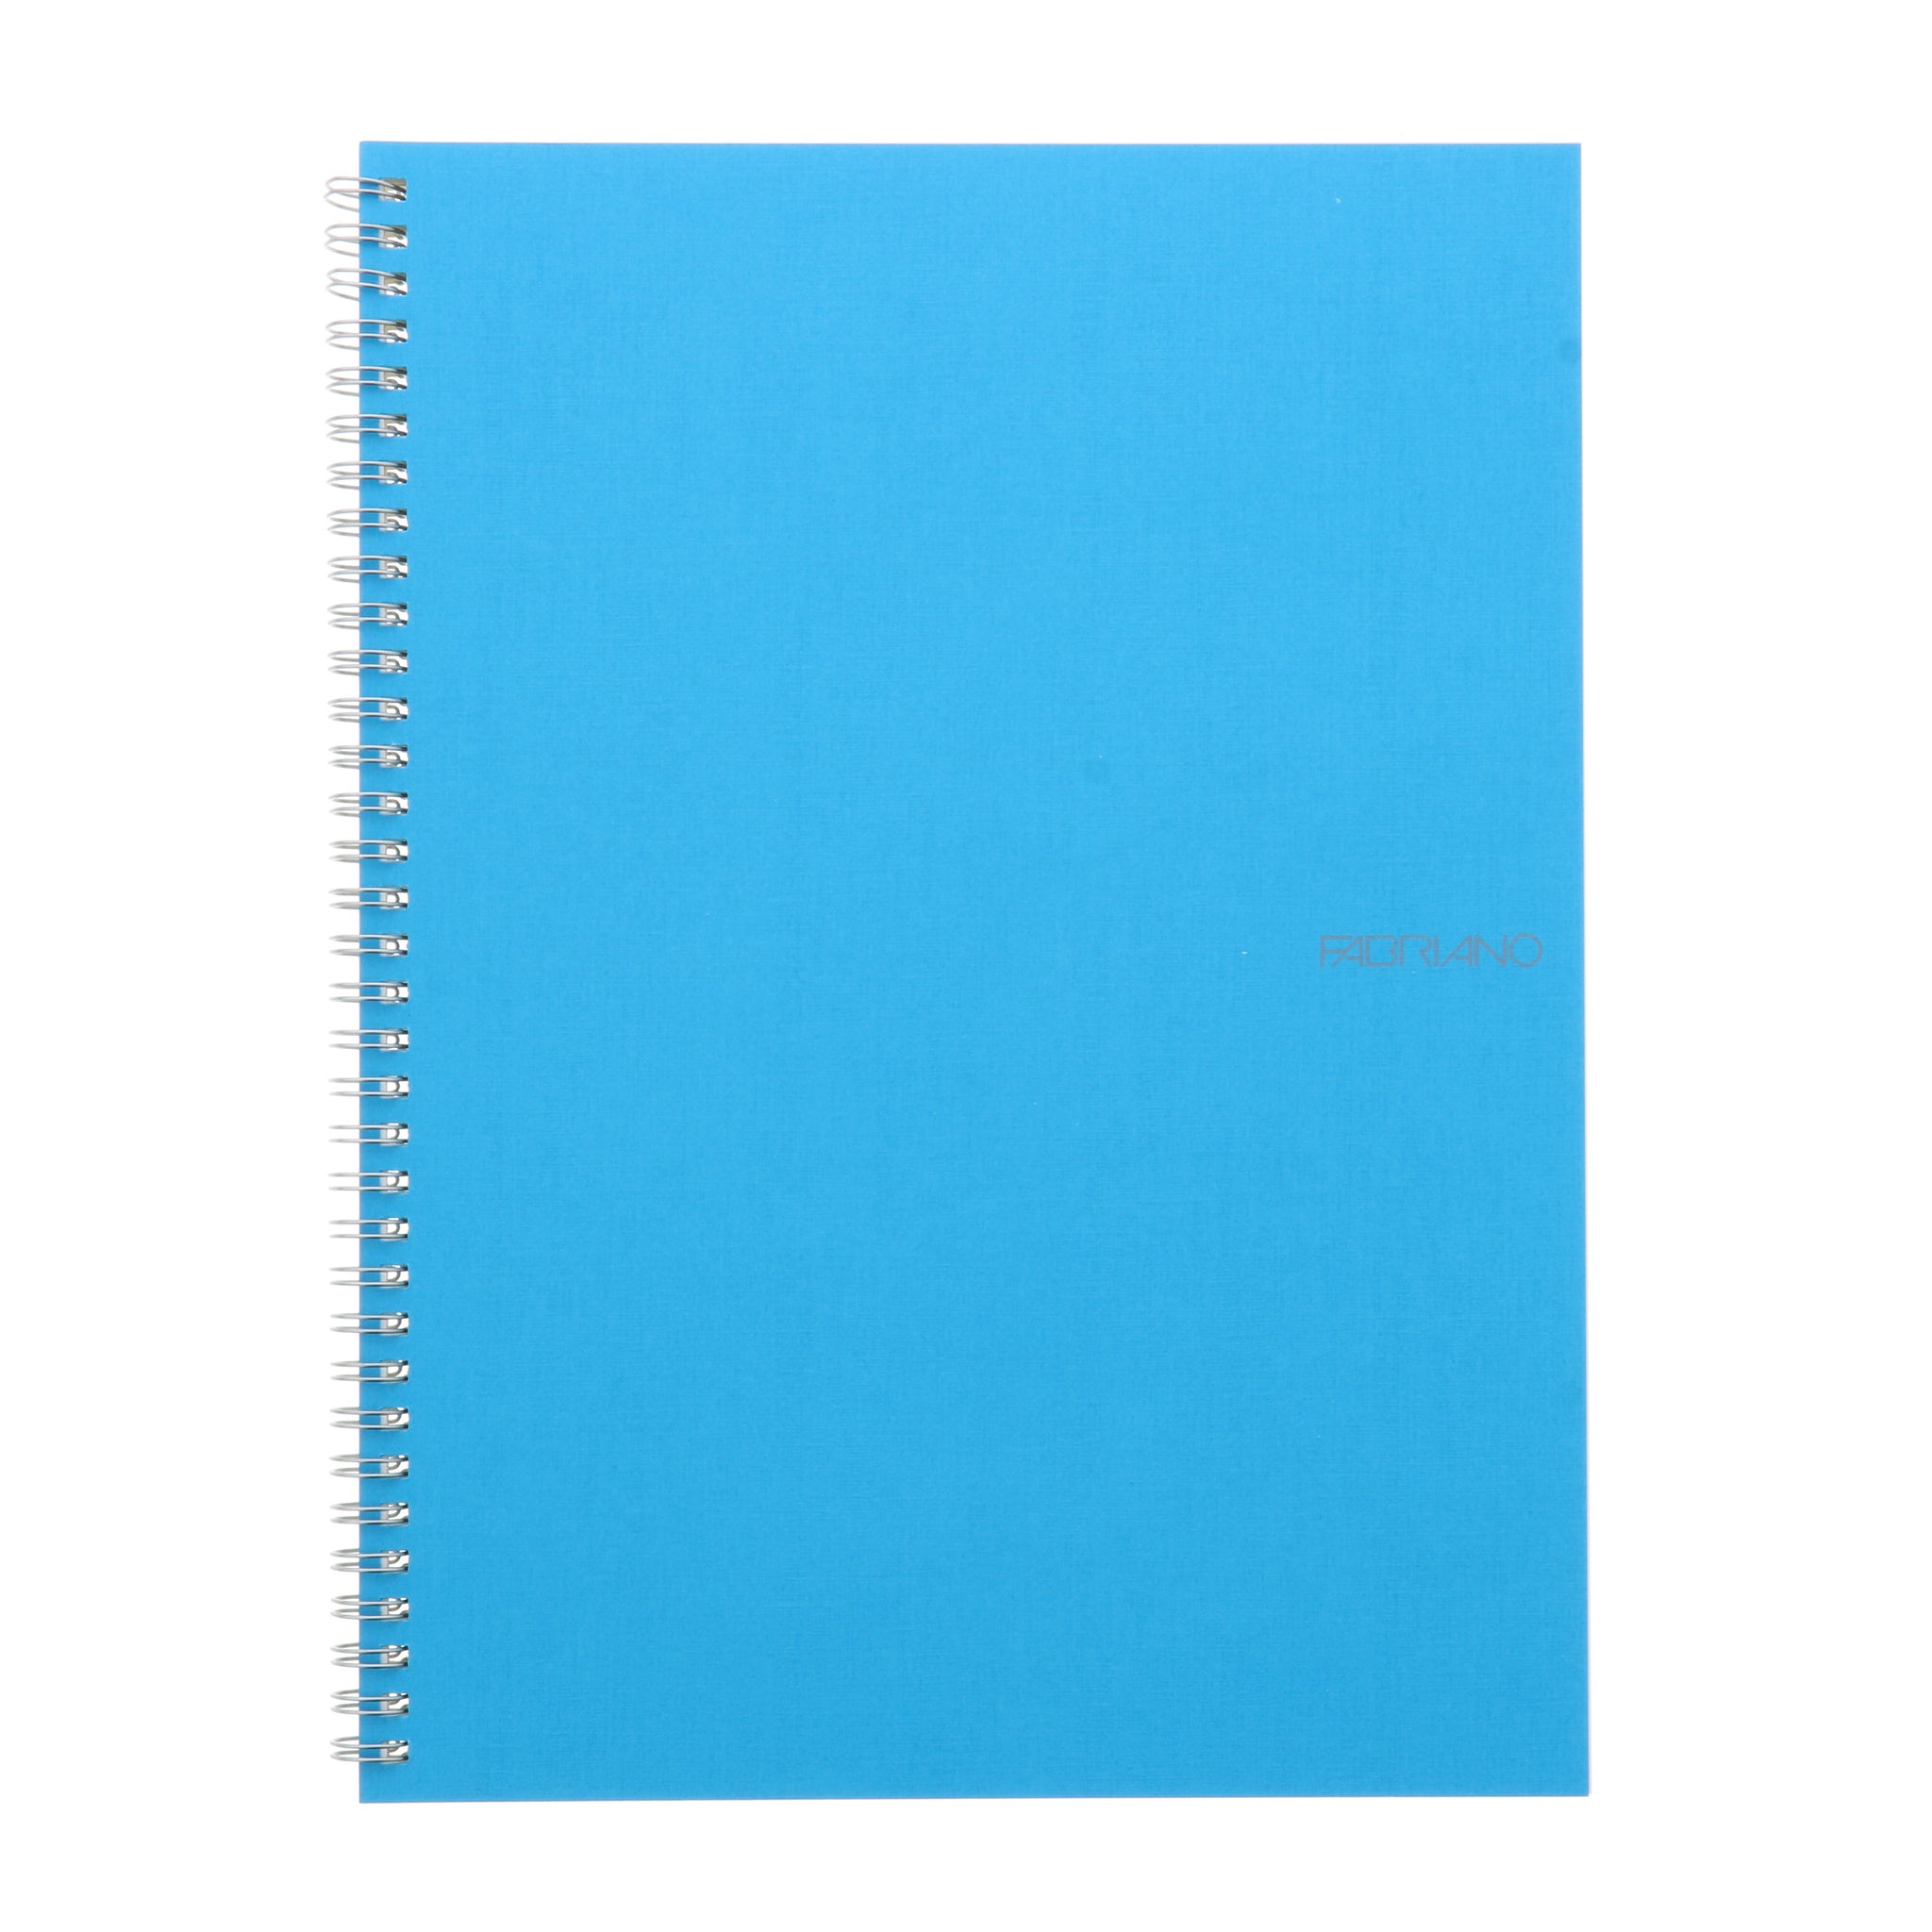 EcoQua Notebook Large Spiral-Bound Blank 70 Sheets Turquoise